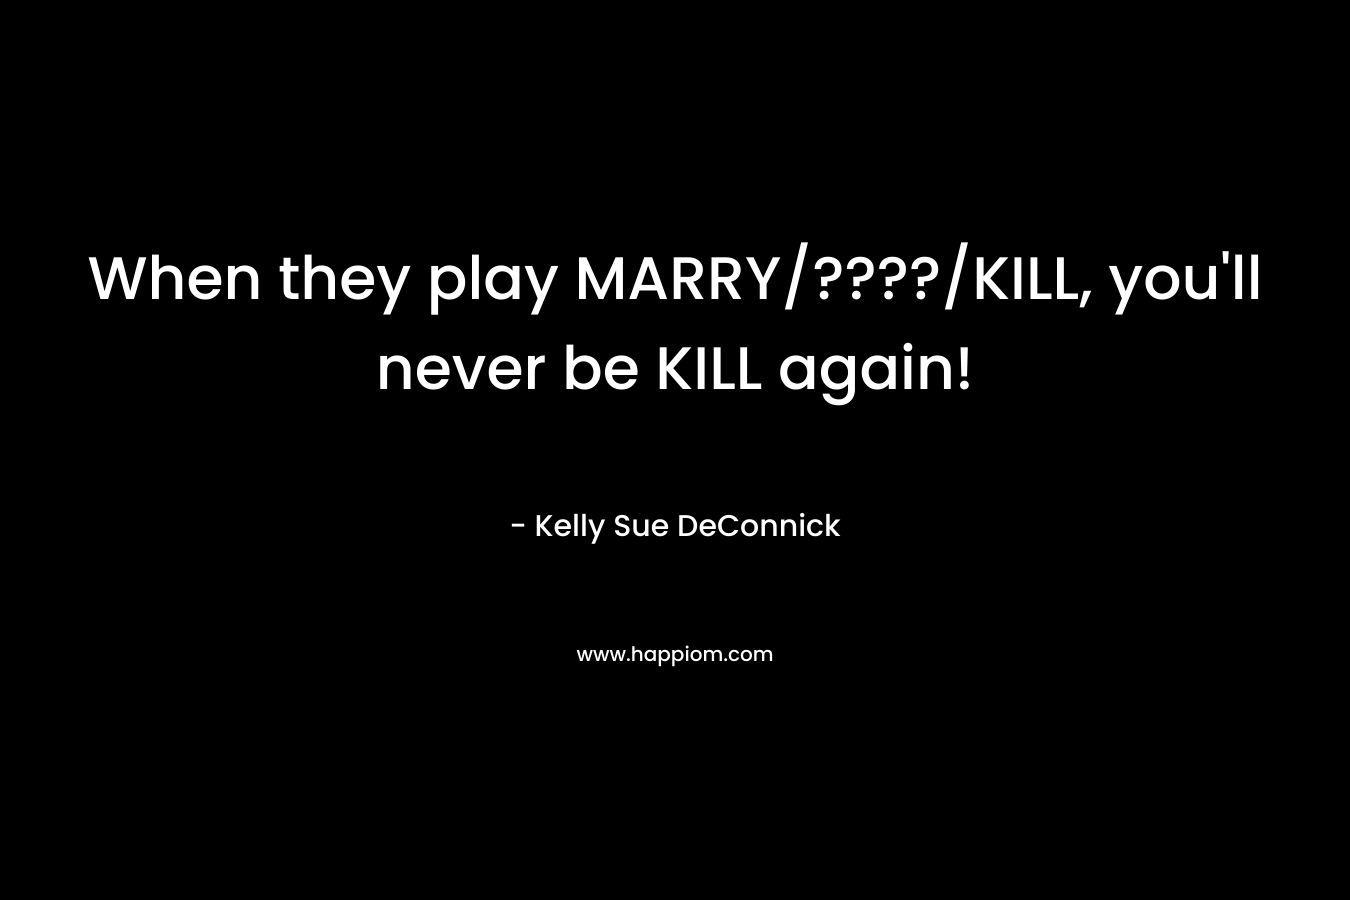 When they play MARRY/????/KILL, you’ll never be KILL again! – Kelly Sue DeConnick